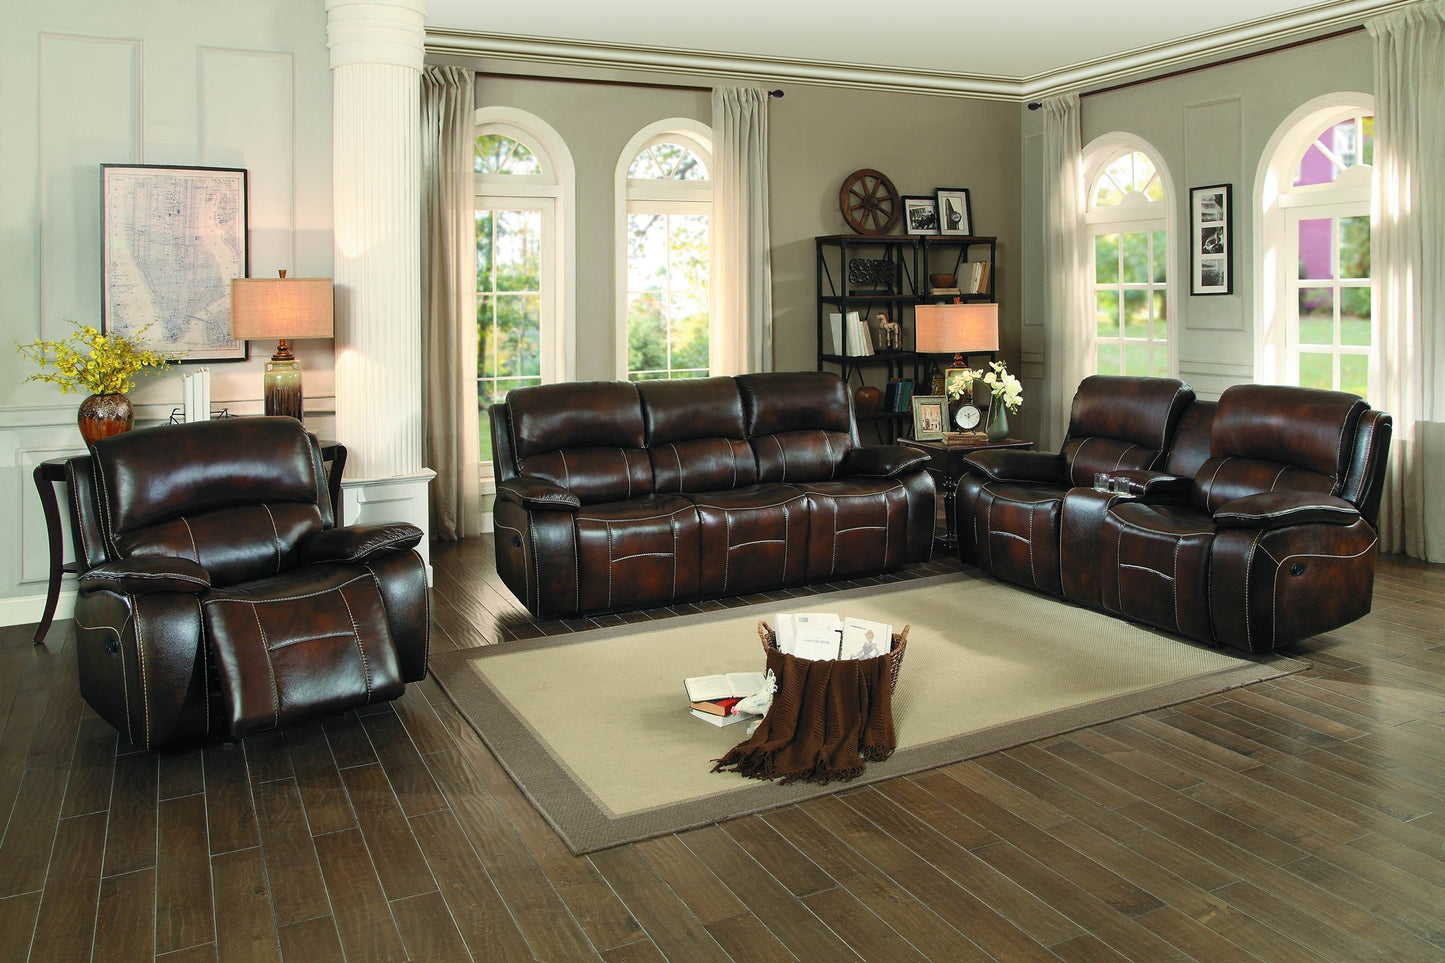 Homelegance Mahala 2PC Double Reclining Love Seat & Glider Recliner Chair in Brown Top Grain Leather